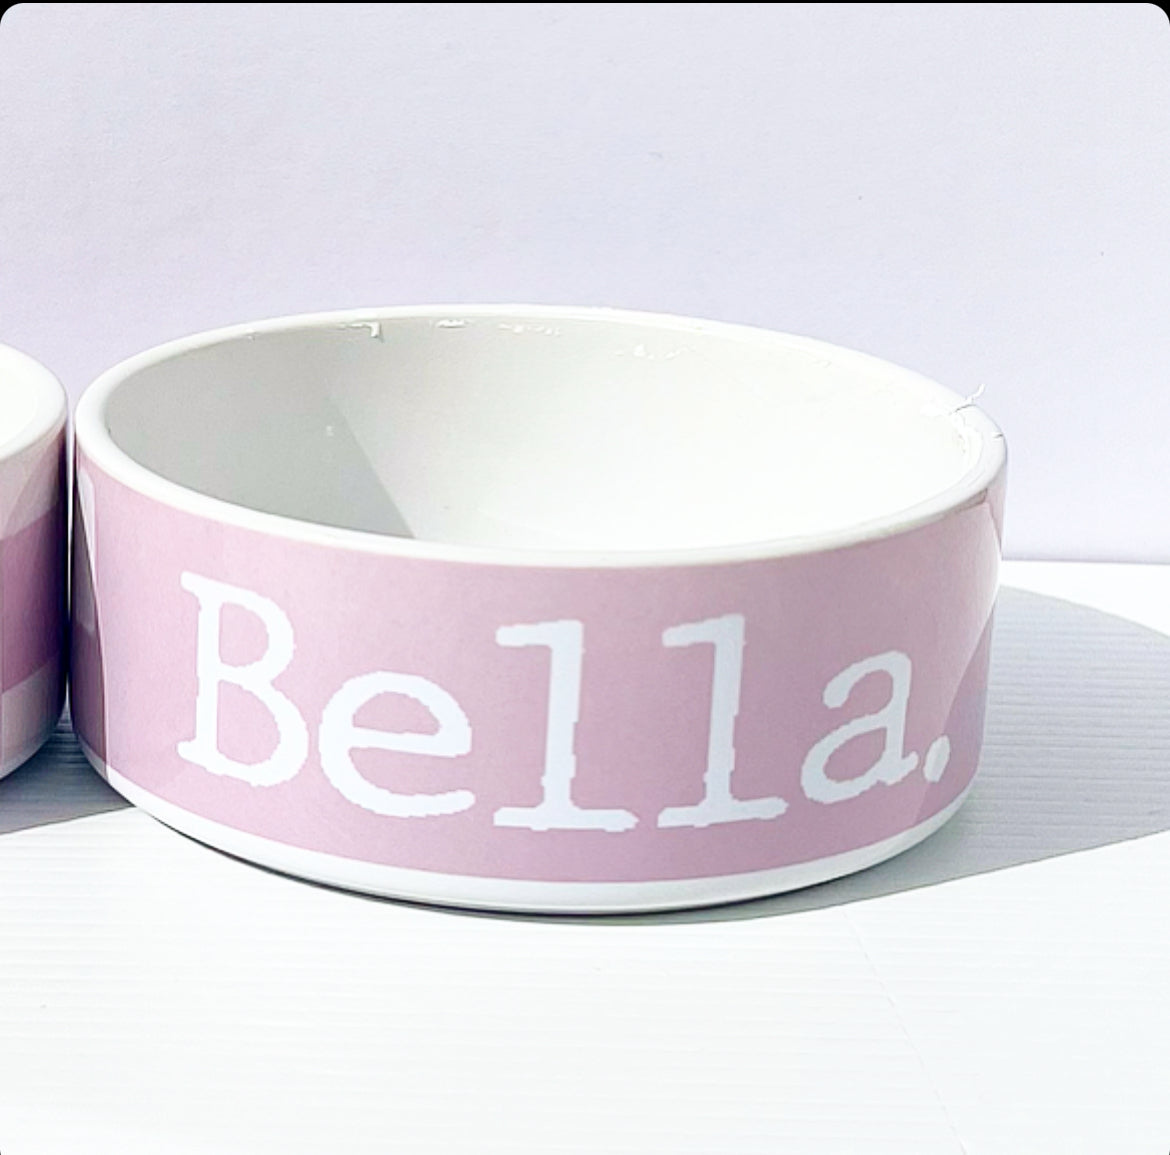 Ceramic personalised Pet Bowl - Add your pets name